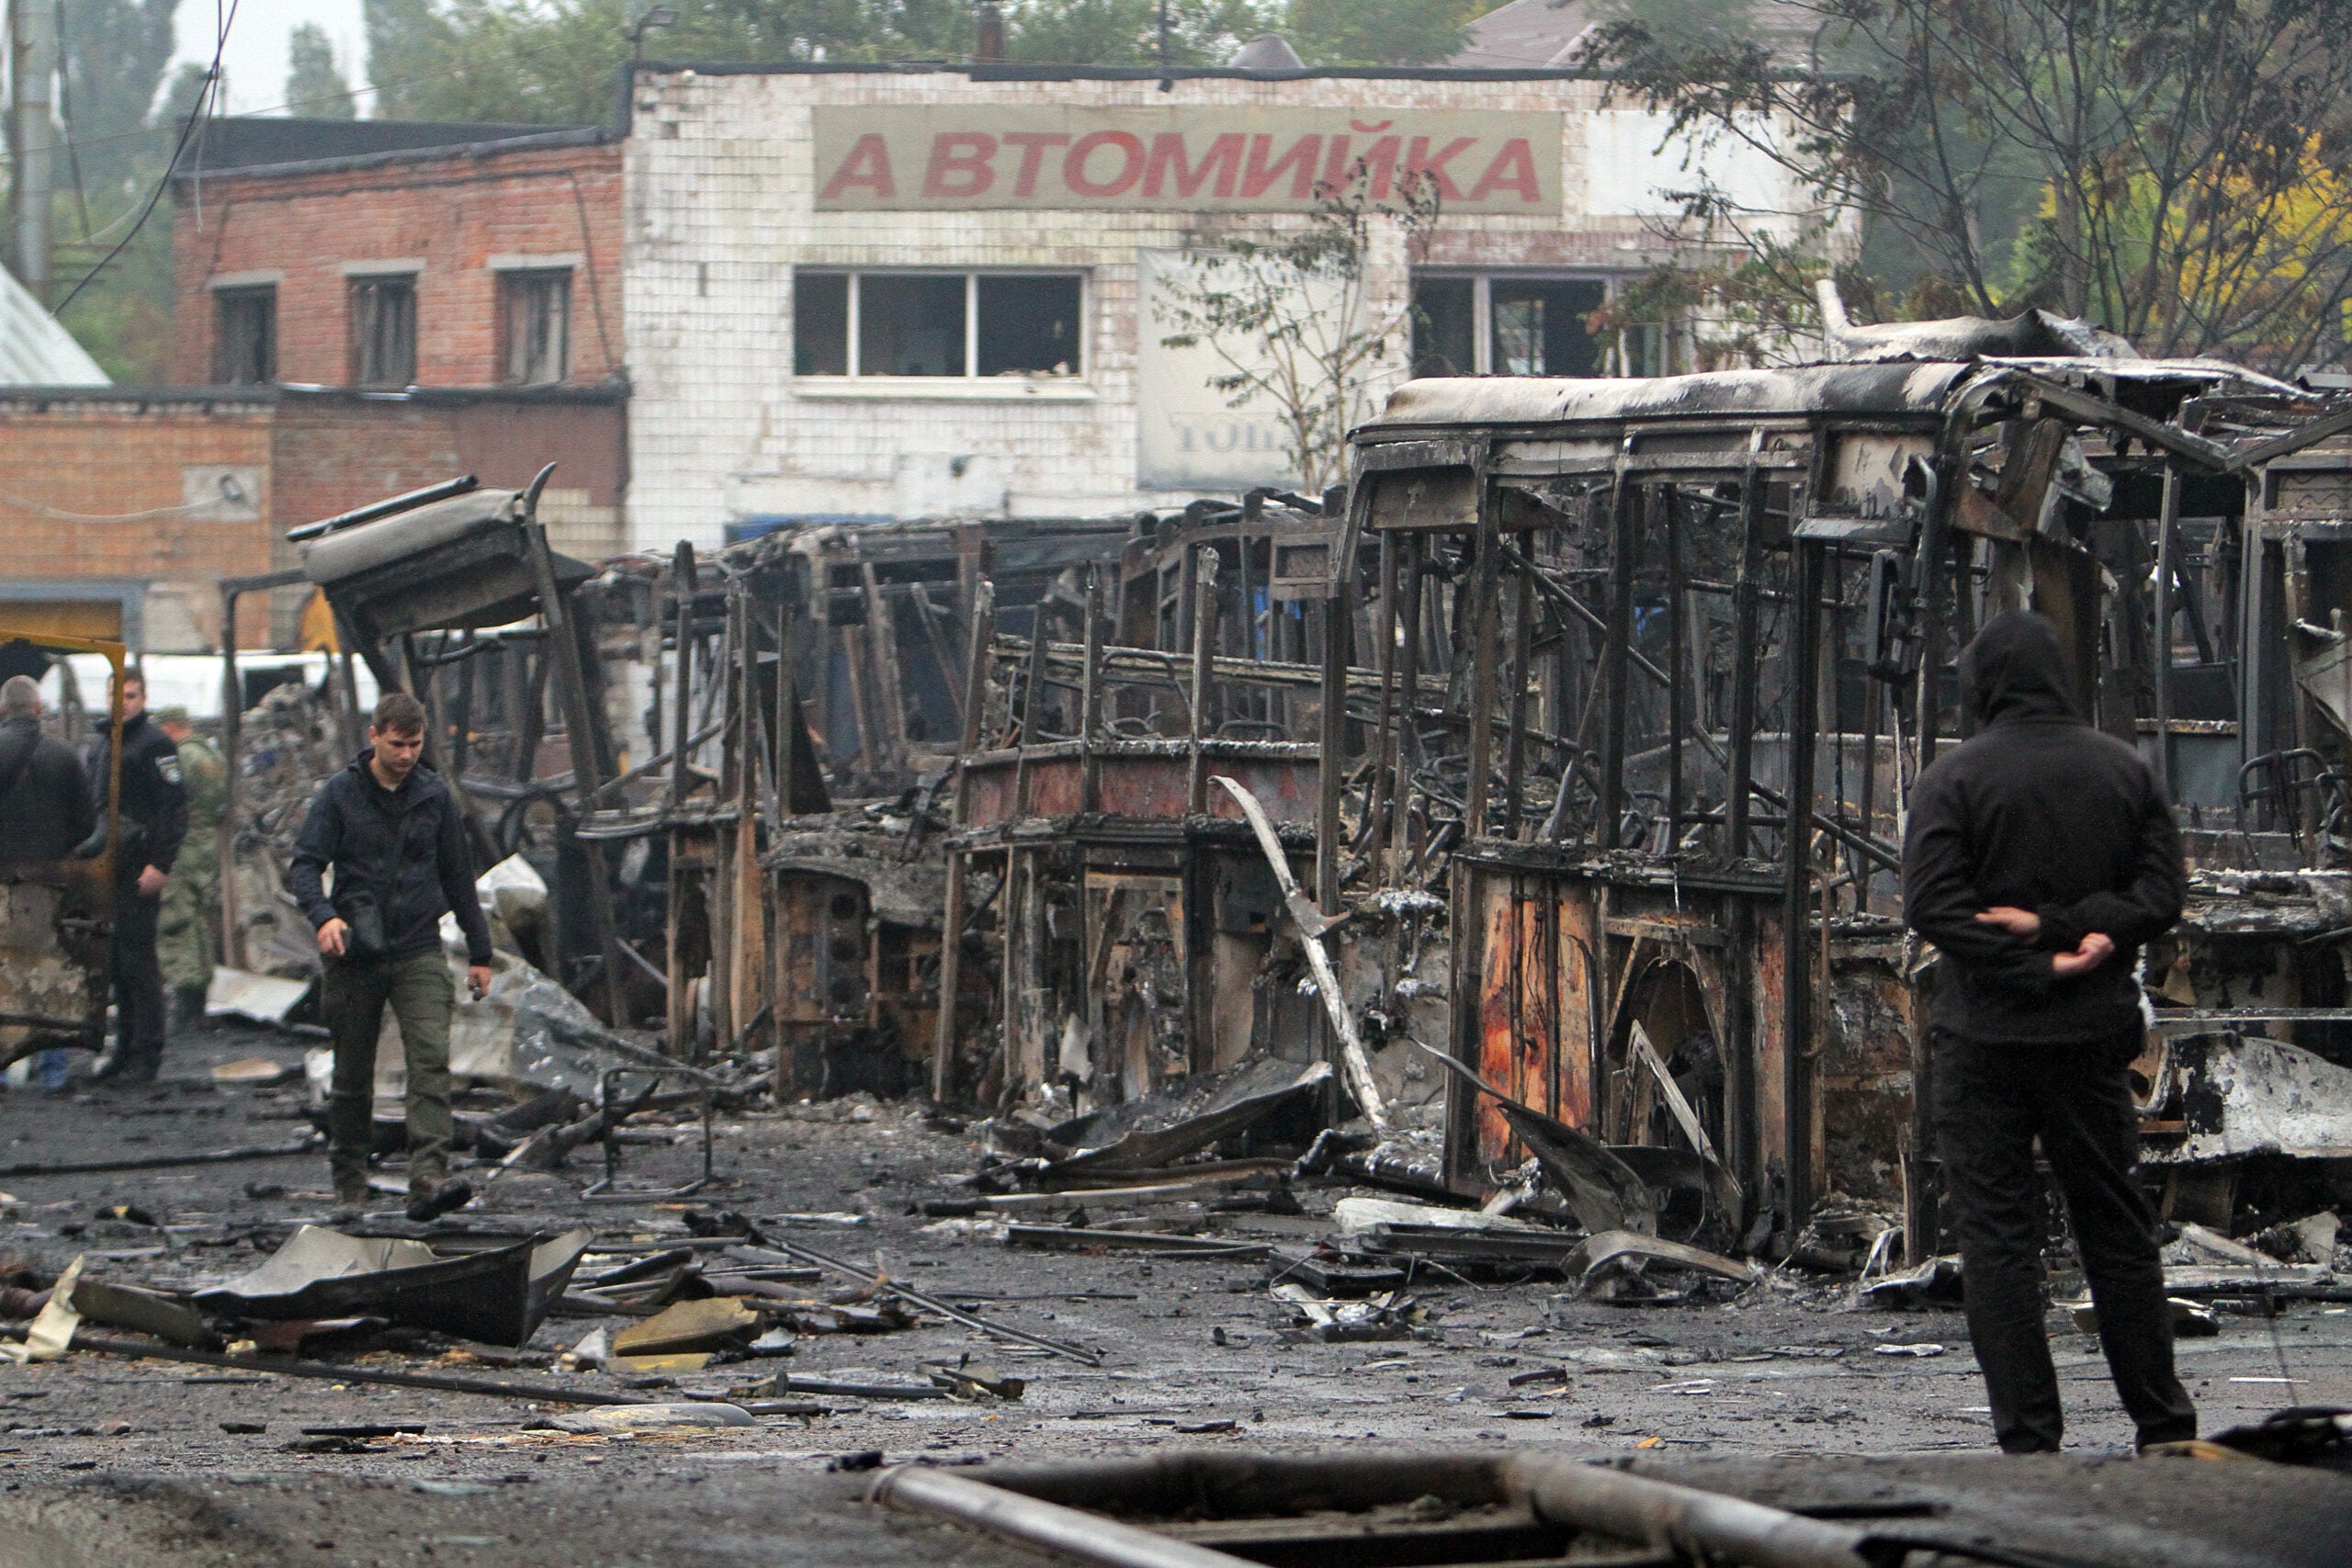 DNIPRO, UKRAINE - SEPTEMBER 29, 2022 - Burnt-out buses are pictured on the premises of a transport company after a Russian Iskander missile attack on Dnipro at night, Dnipro, central Ukraine. As reported, one person was killed and five people were injured in the strike. In the fire at the transport company, 52 buses burnt down while another 98 were damaged as a result of the missile attack. (Photo credit should read Mykola Miakshykov / Ukrinform/Future Publishing via Getty Images)